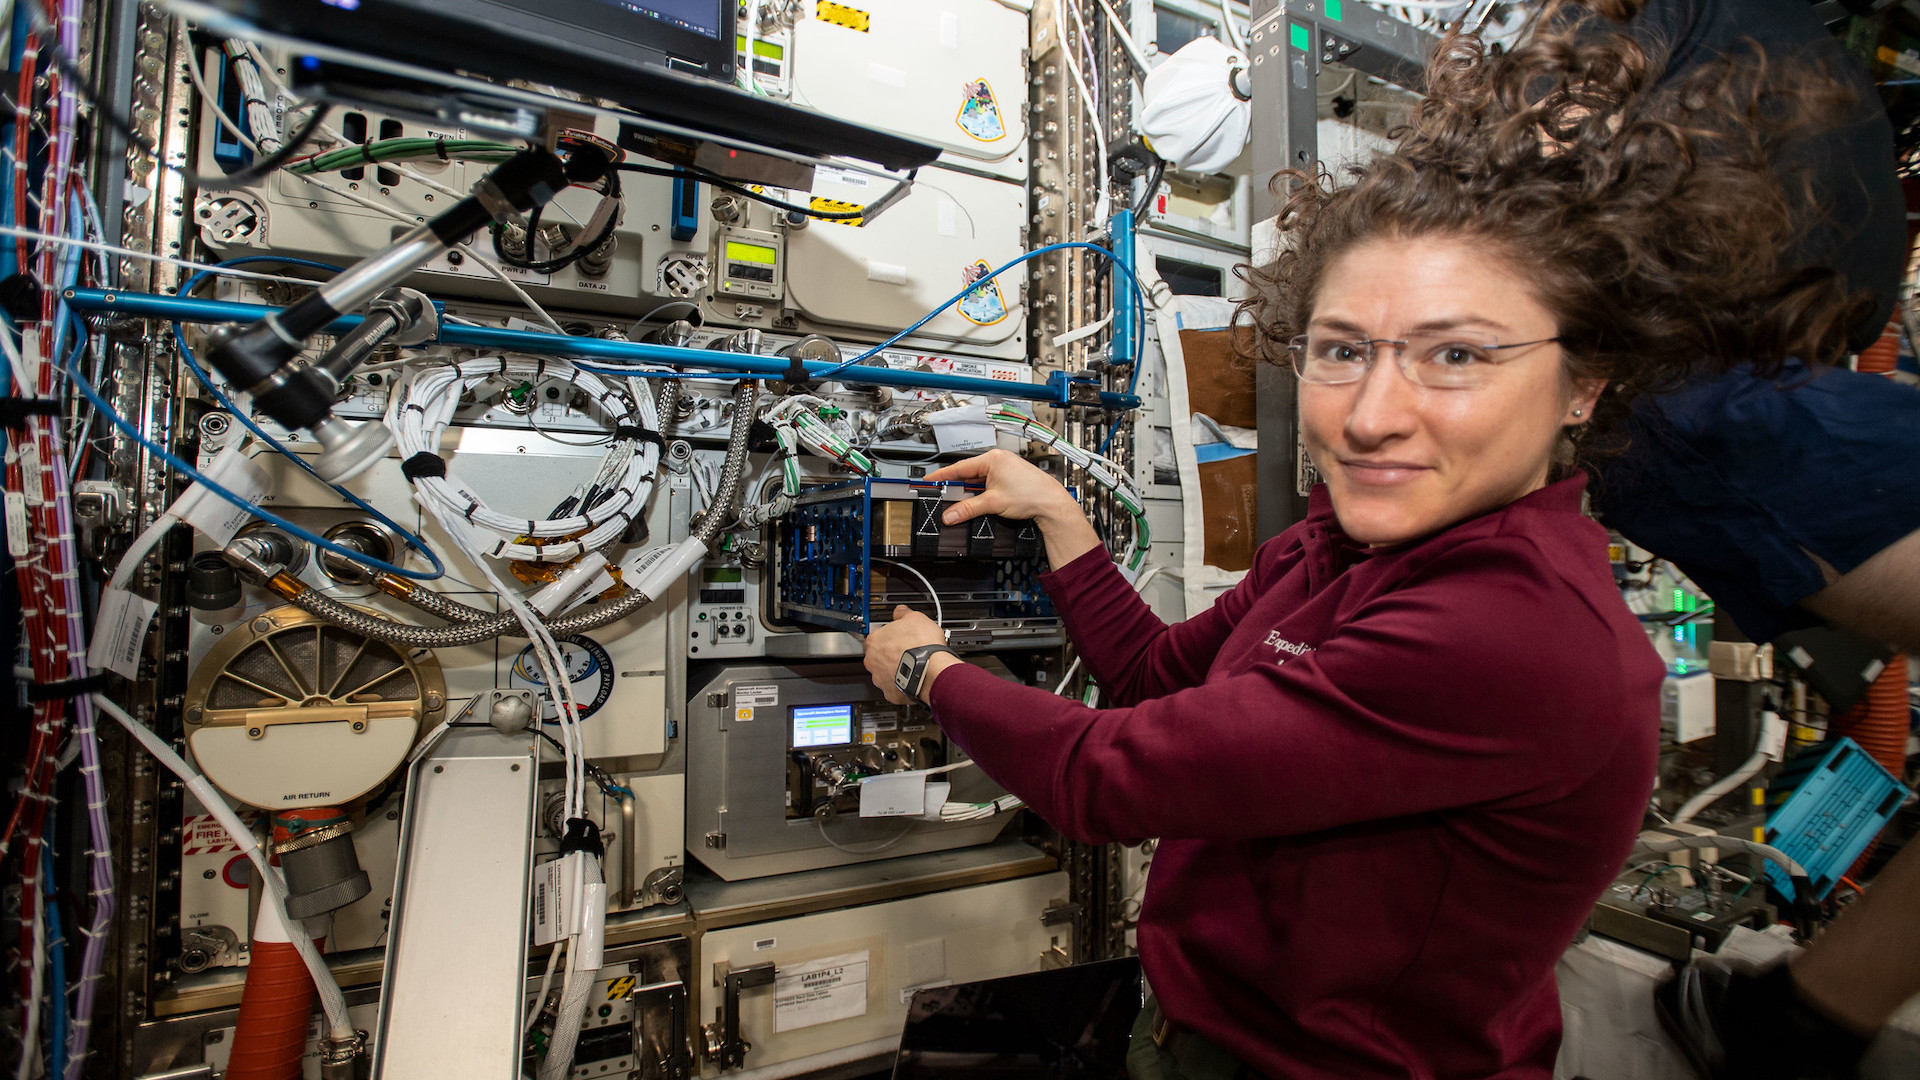 August, 2019: Expedition 60 Flight Engineer Christina Koch of NASA conducts science operations for the BioFabrication Facility experiment researching the effectiveness of using 3D biological printers to produce usable human organs in microgravity.